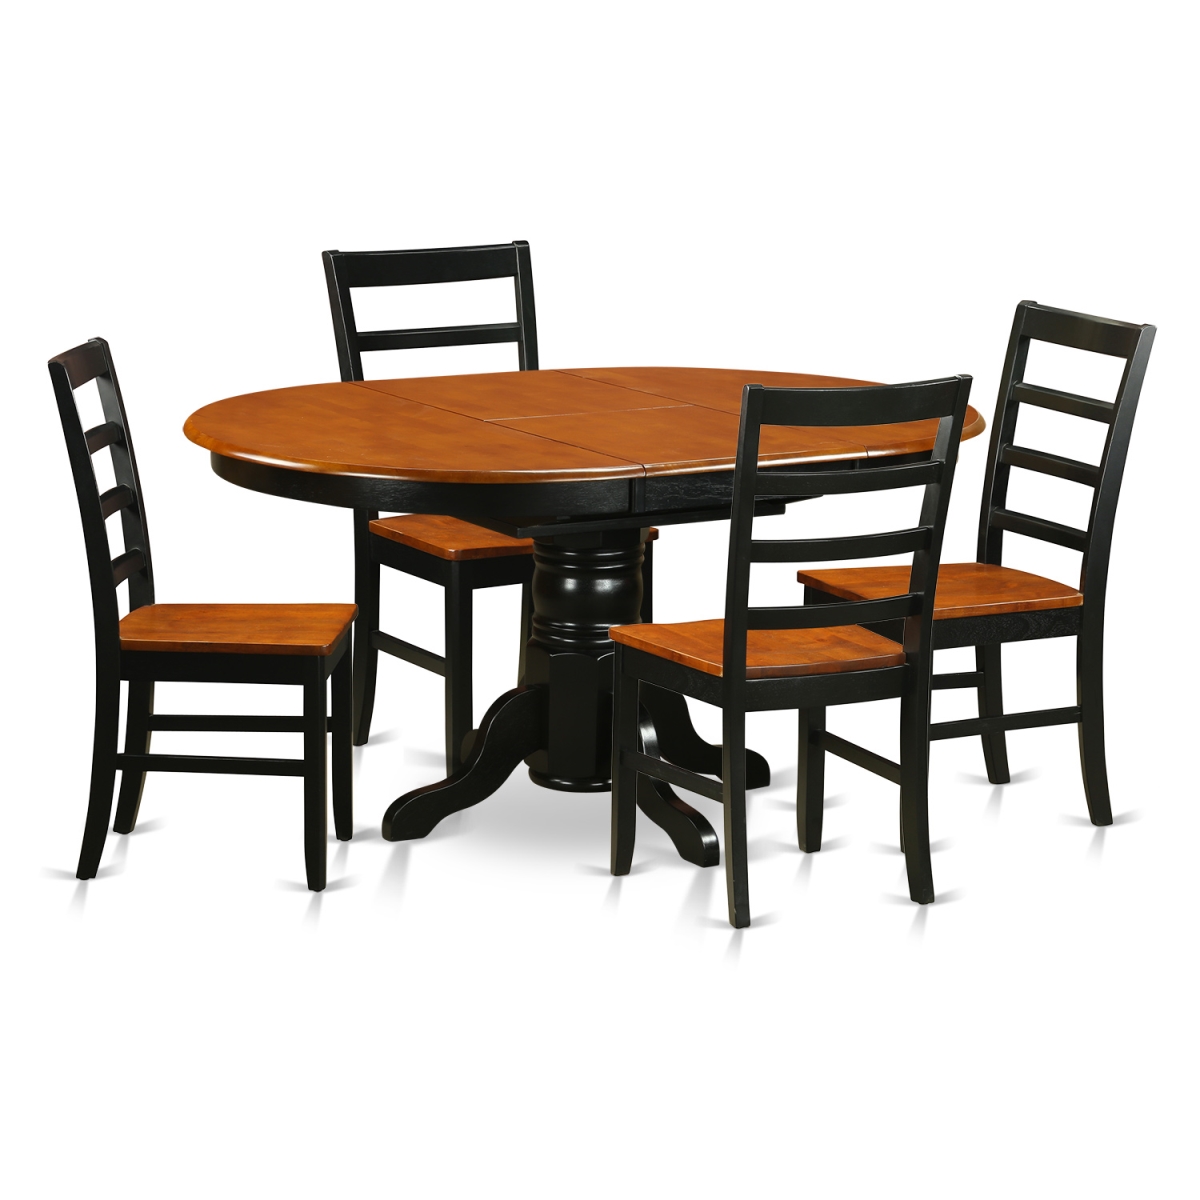 Picture of East West Furniture AVPF5-BCH-W Wood Seat Dining Set with 4 Wooden Chairs, Black & Cherry - 5 Piece